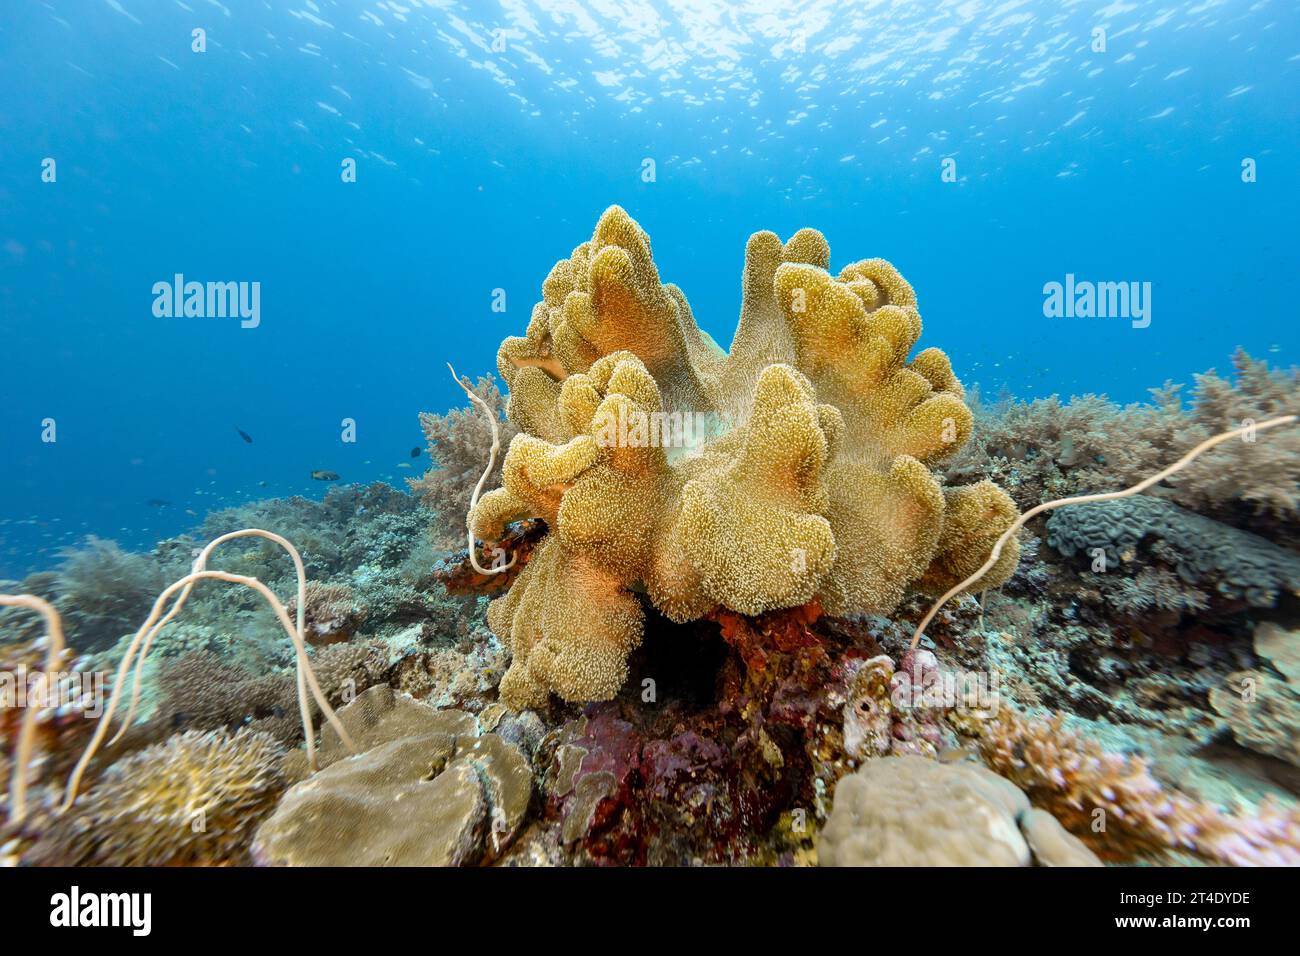 Large toadstool leather coral, Sarcophyton glaucum, outcrop on coral reef in blue tropical waters Stock Photo